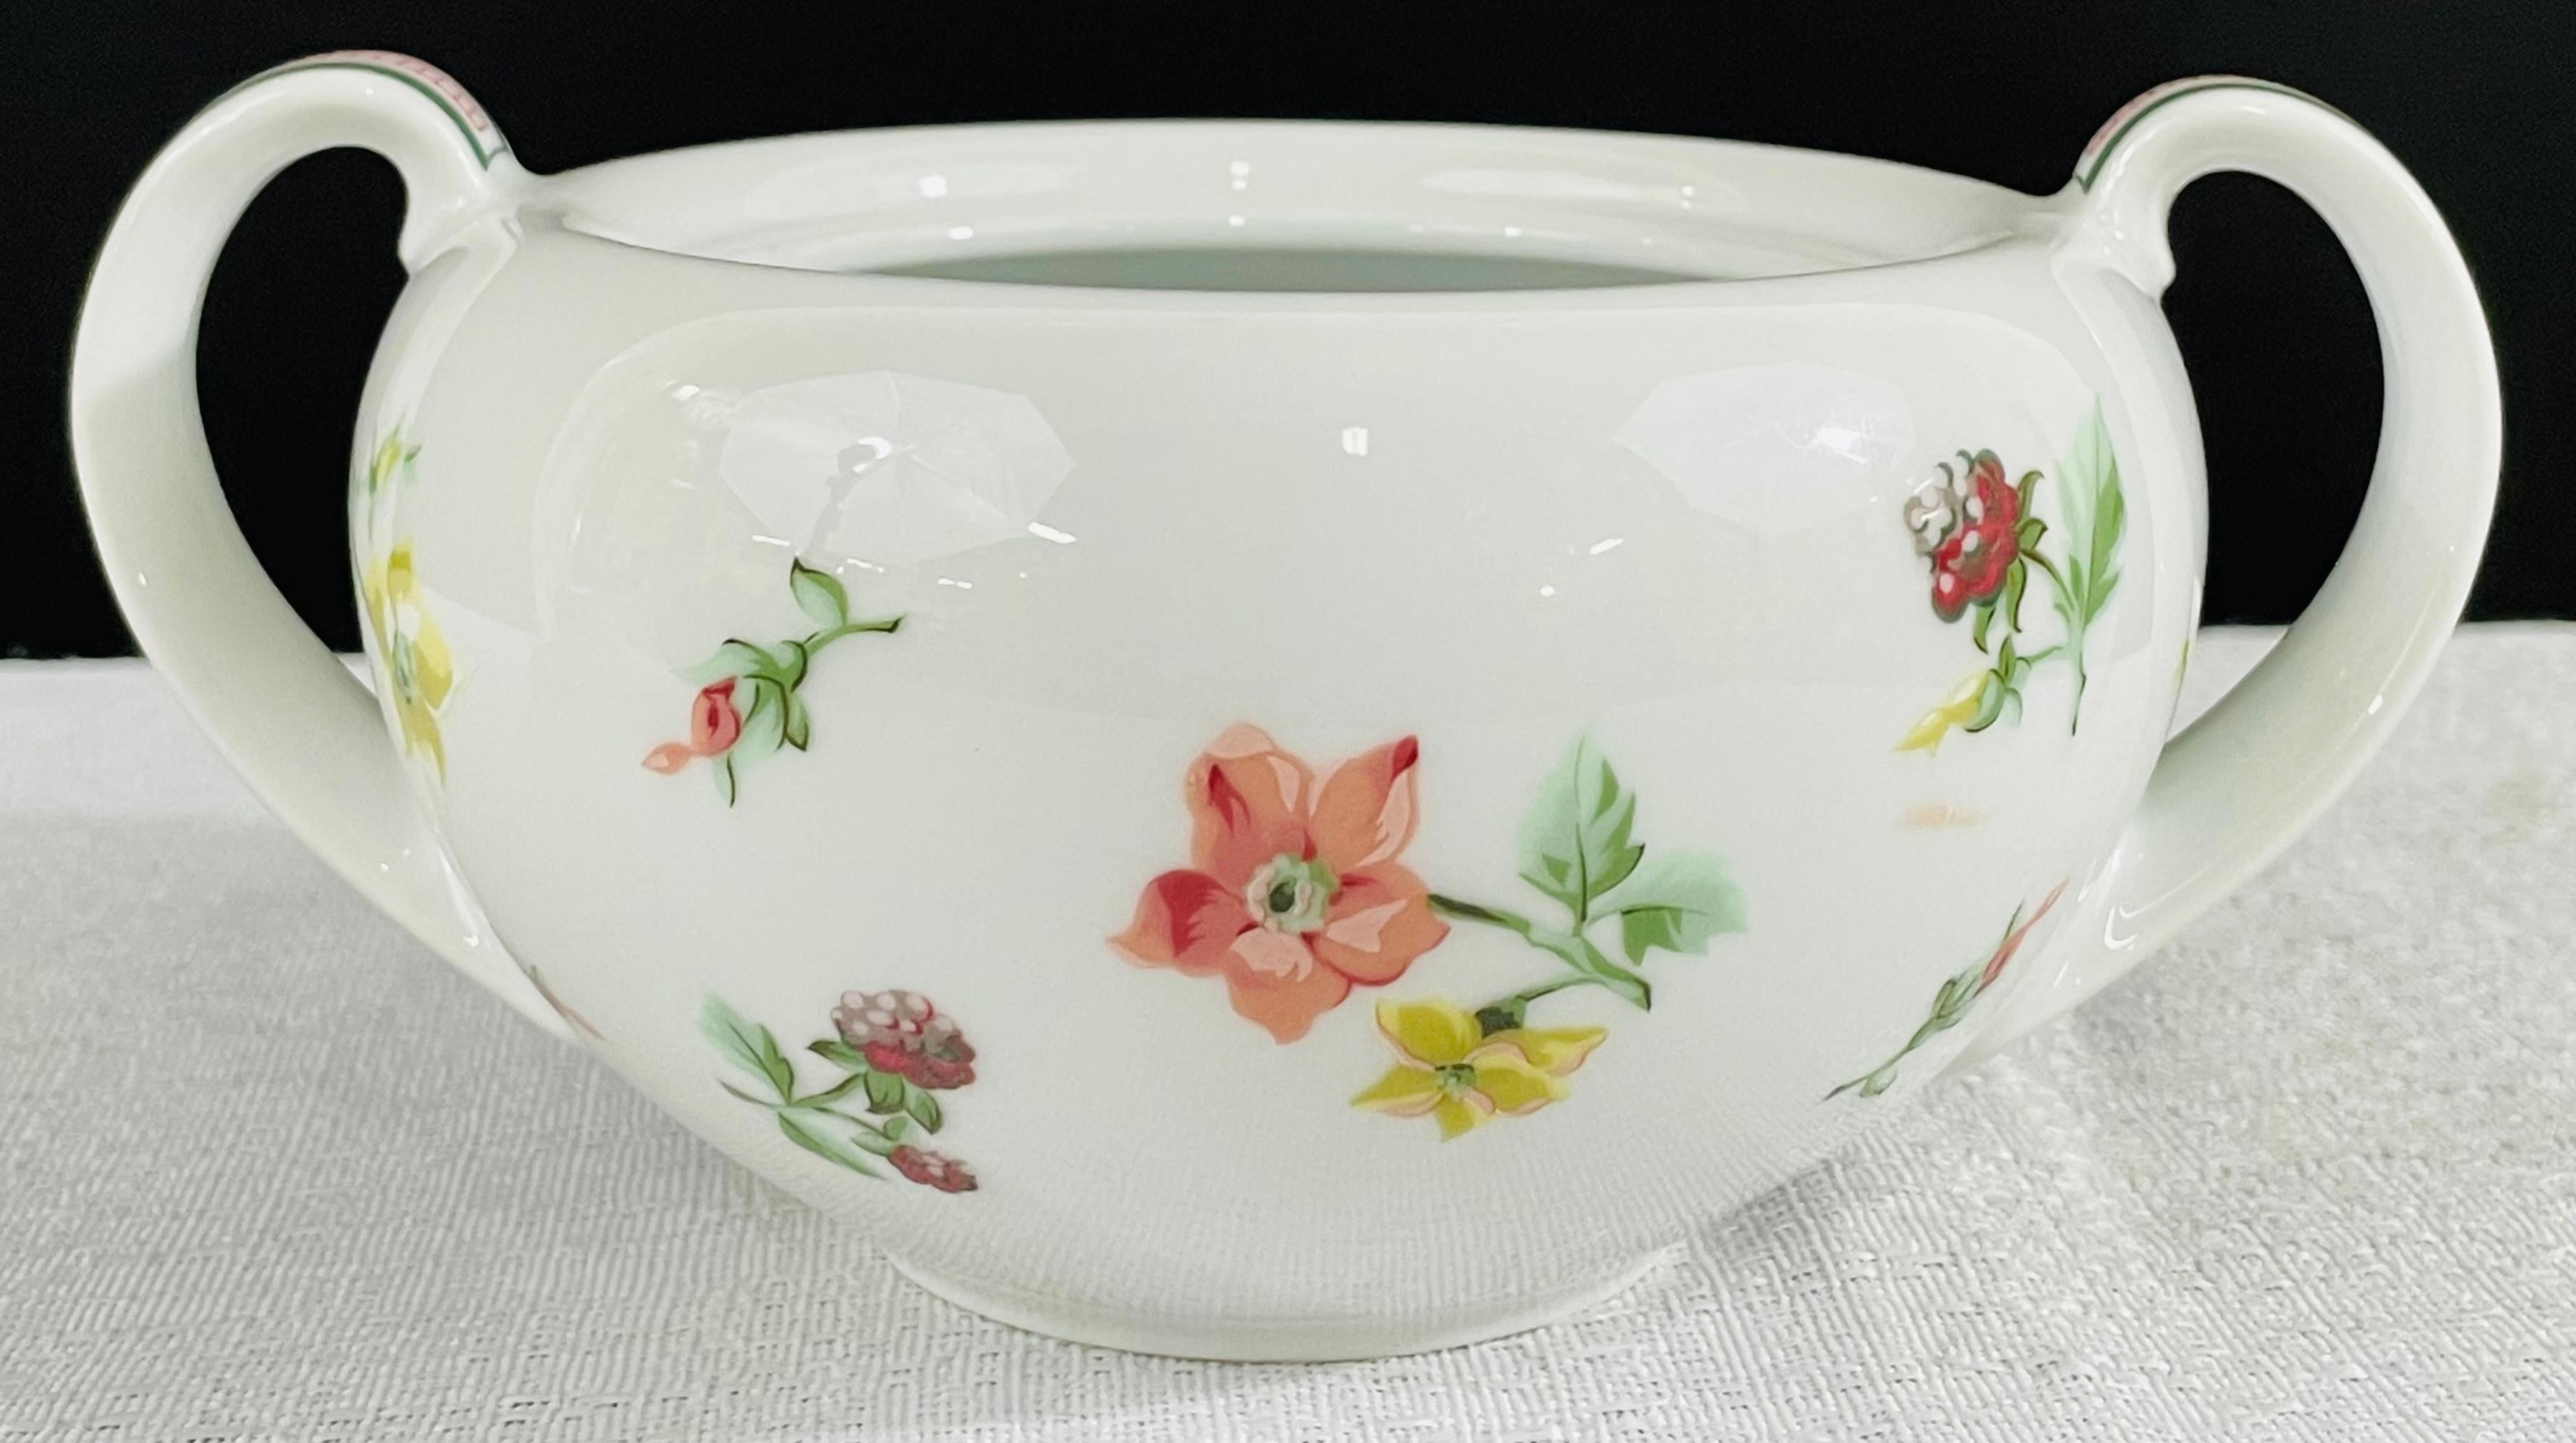 Christian Dior Provence Collection Porcelain Sugar Bowl and Creamer, Set of 2 In Good Condition For Sale In Plainview, NY